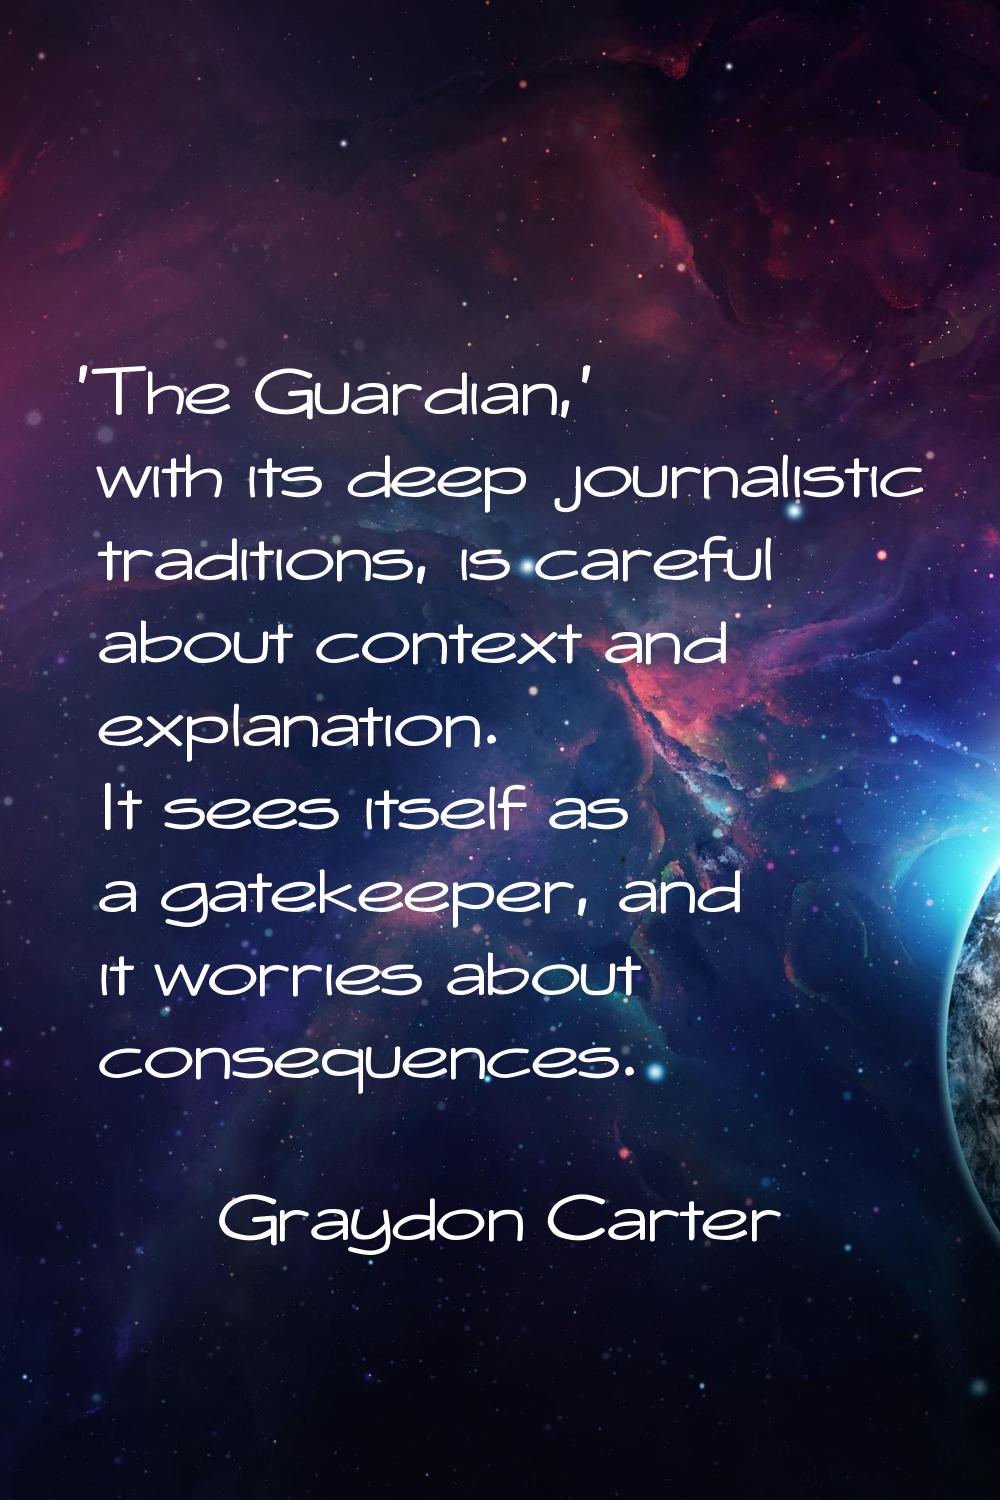 'The Guardian,' with its deep journalistic traditions, is careful about context and explanation. It